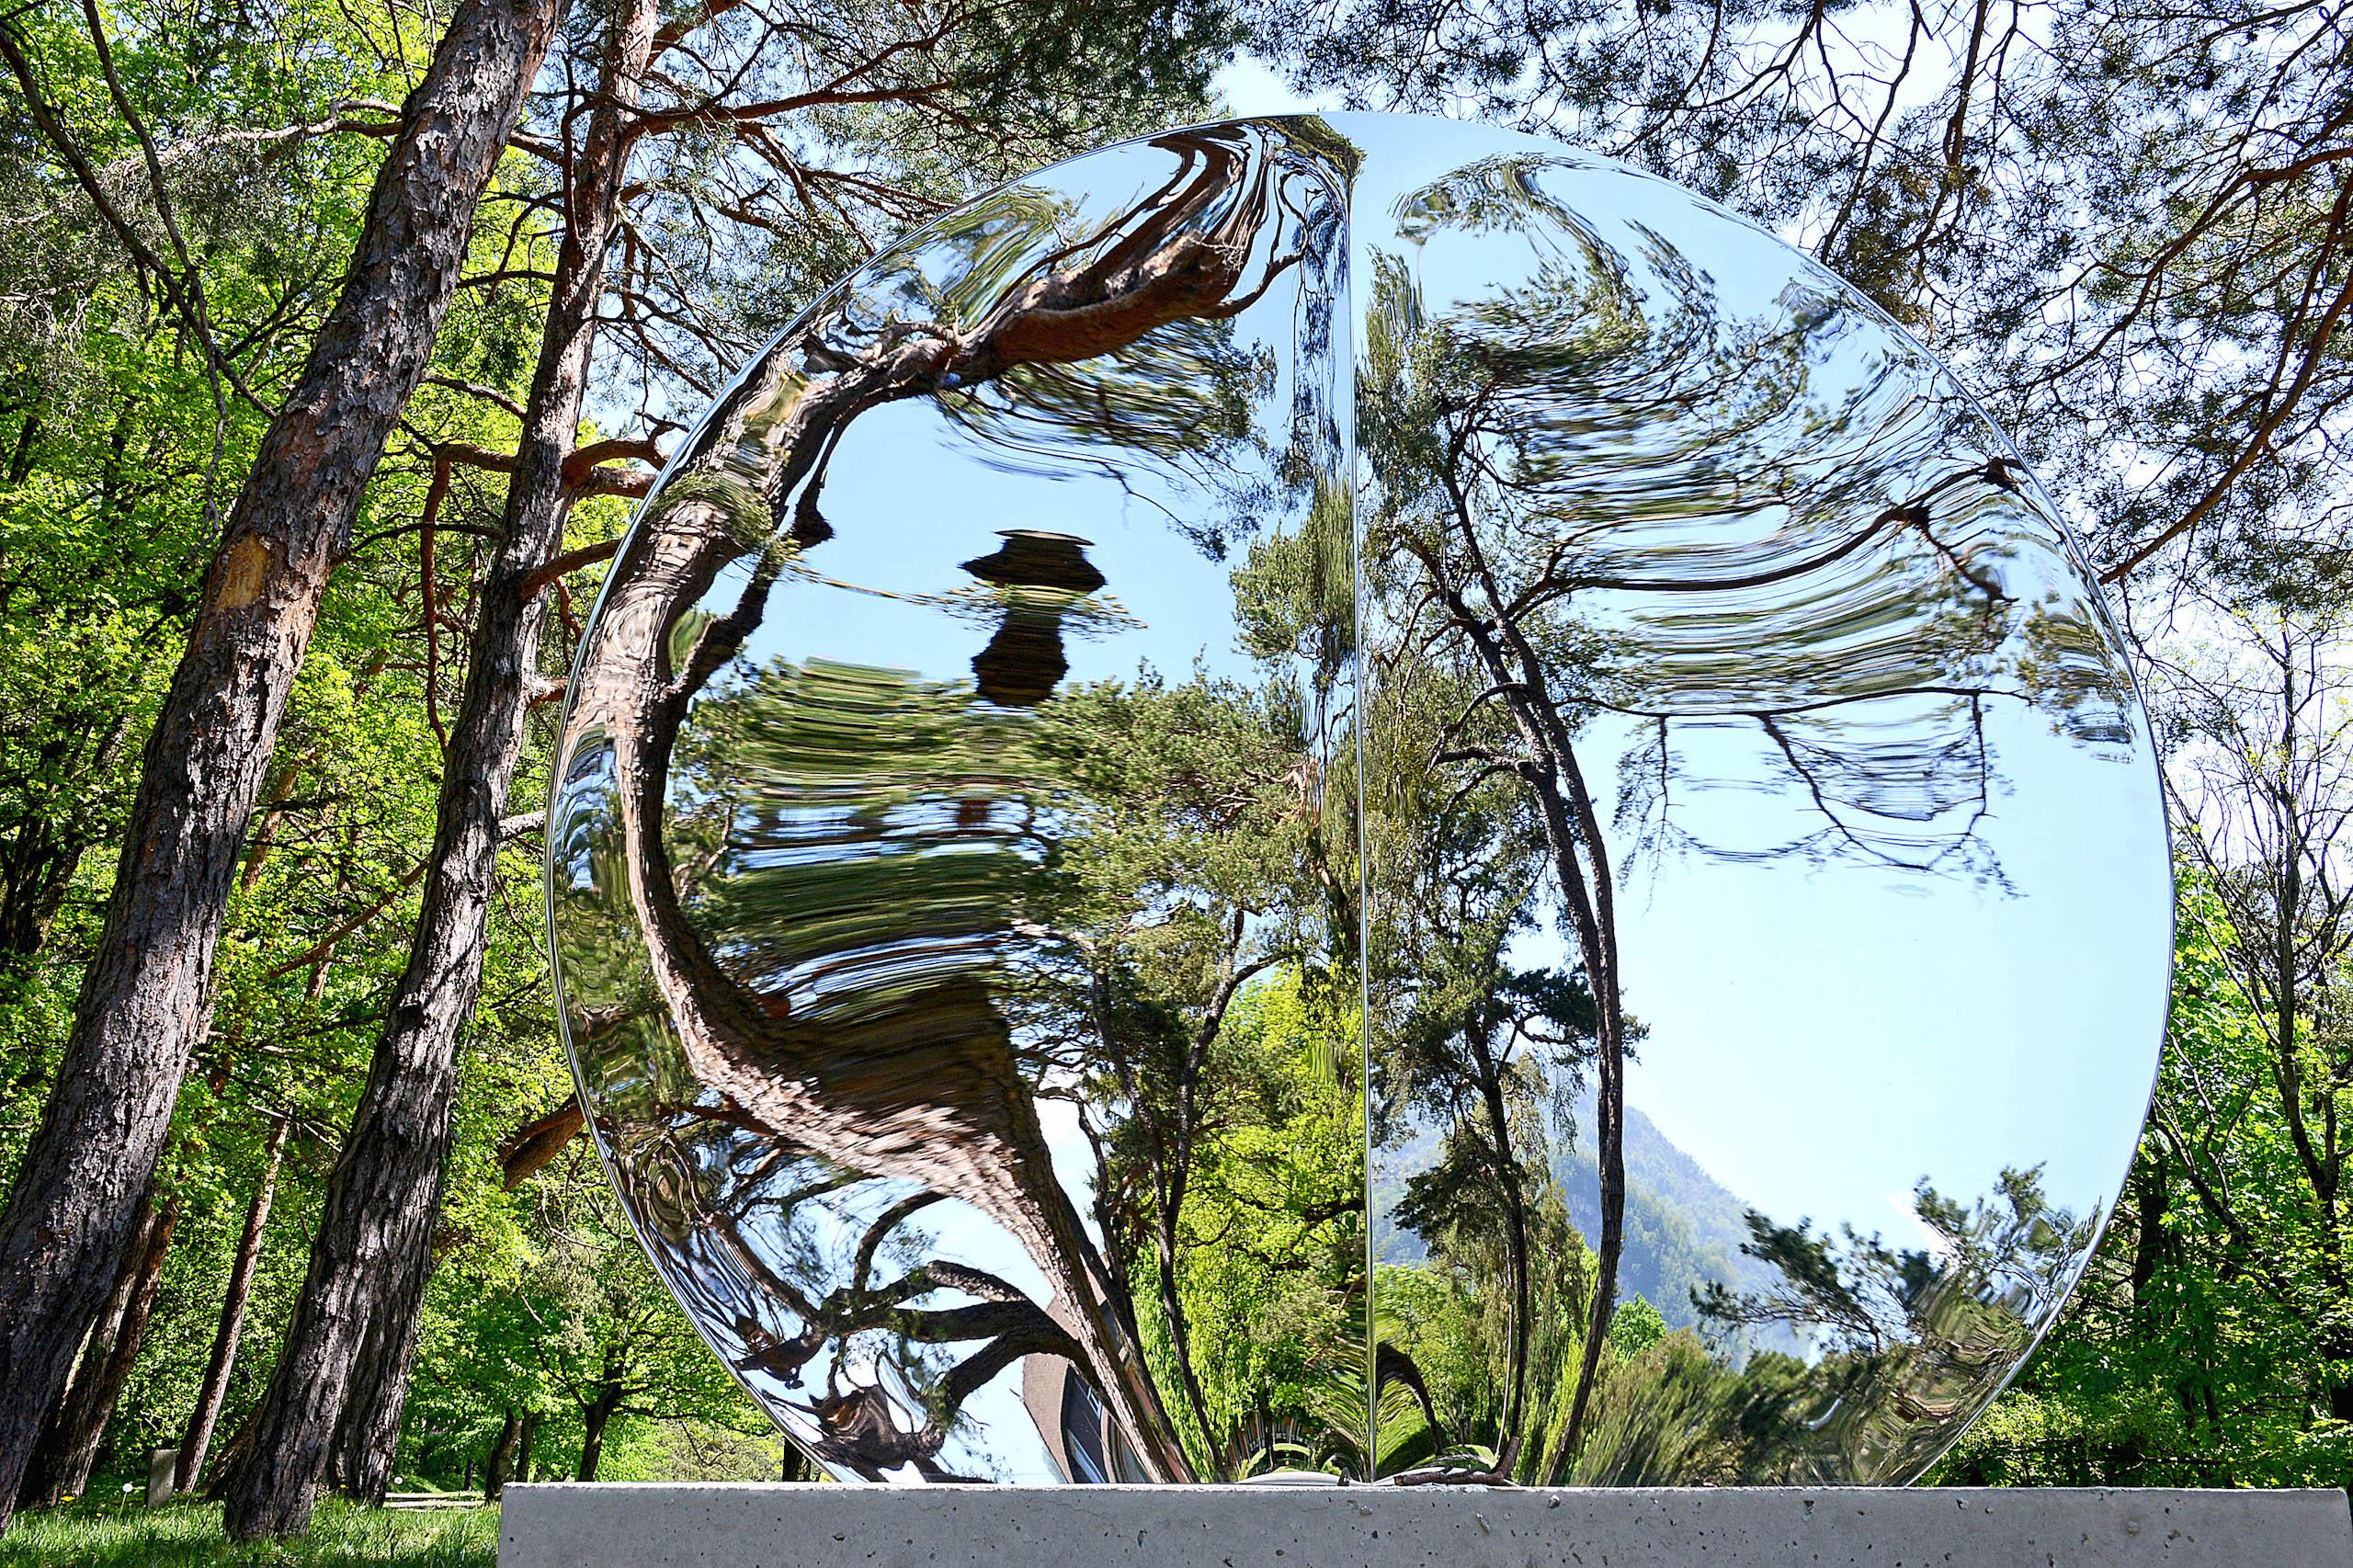 Mirror “with fold” 148 by Franck K - Large stainless steel sculpture, reflection